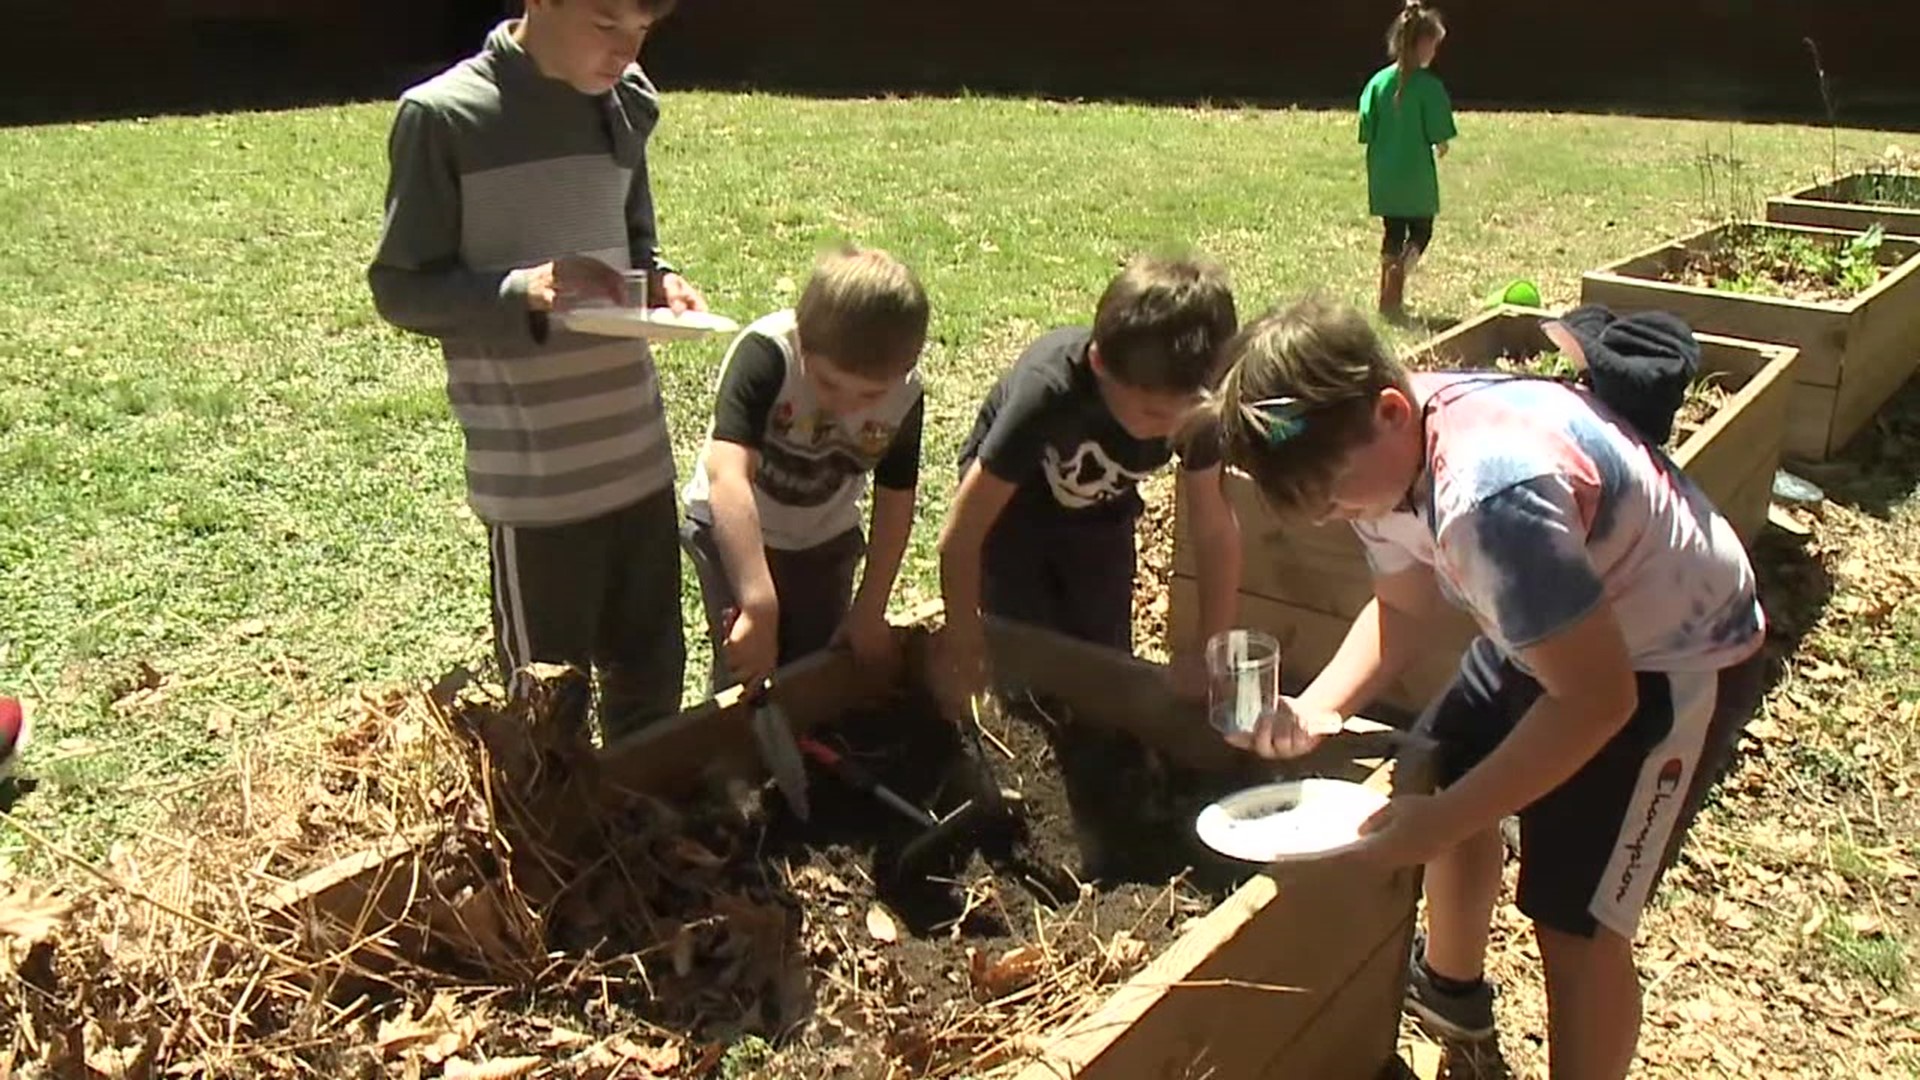 Lake-Noxen Elementary students spent the day learning about the great outdoors.